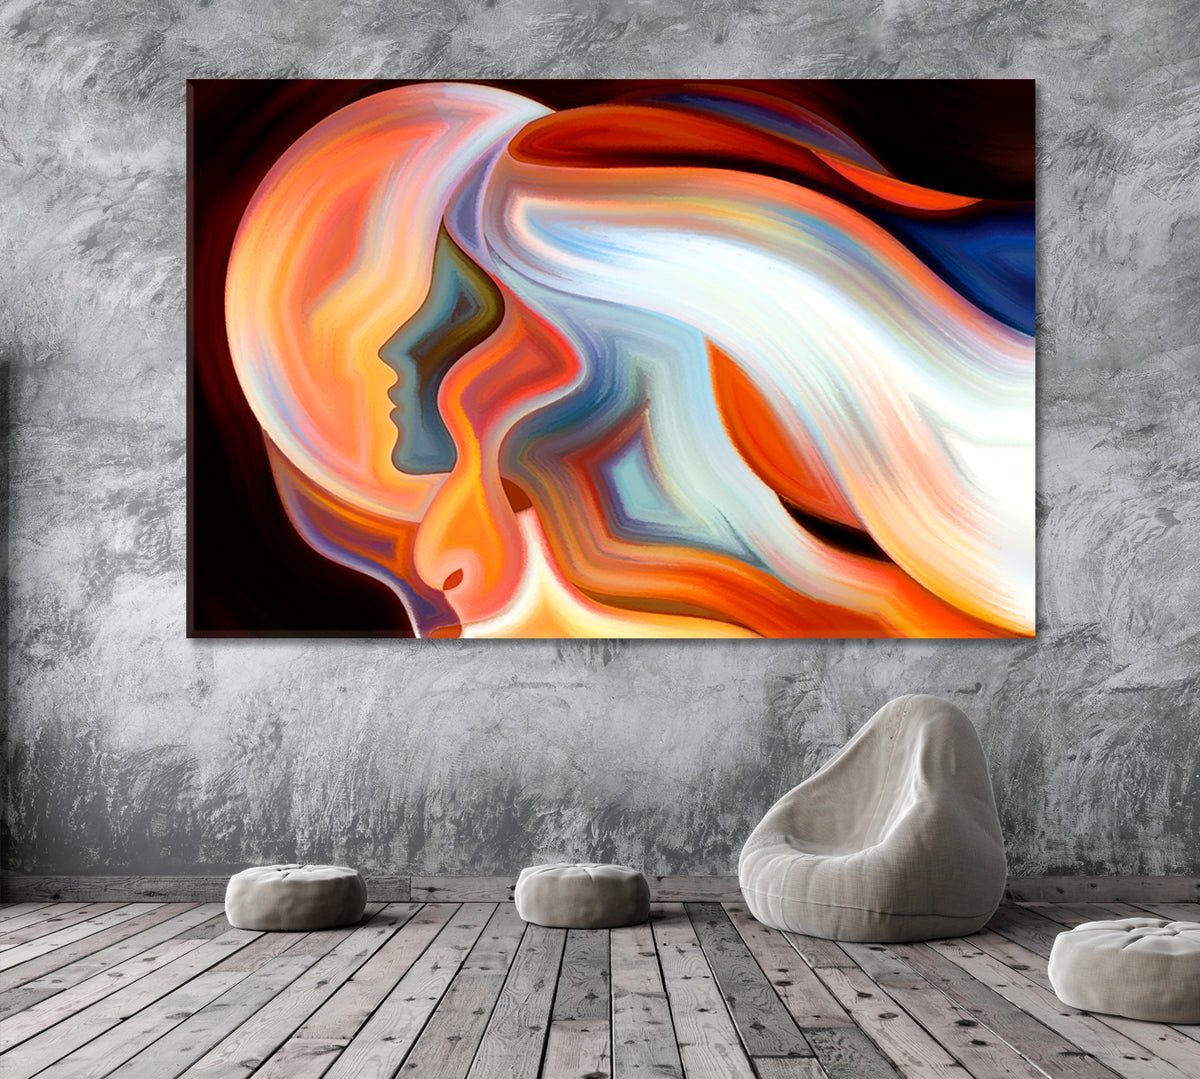 Human Moon Emotion and Spirituality Abstraction Celestial Home Canvas Décor Artesty 1 panel 24" x 16" 